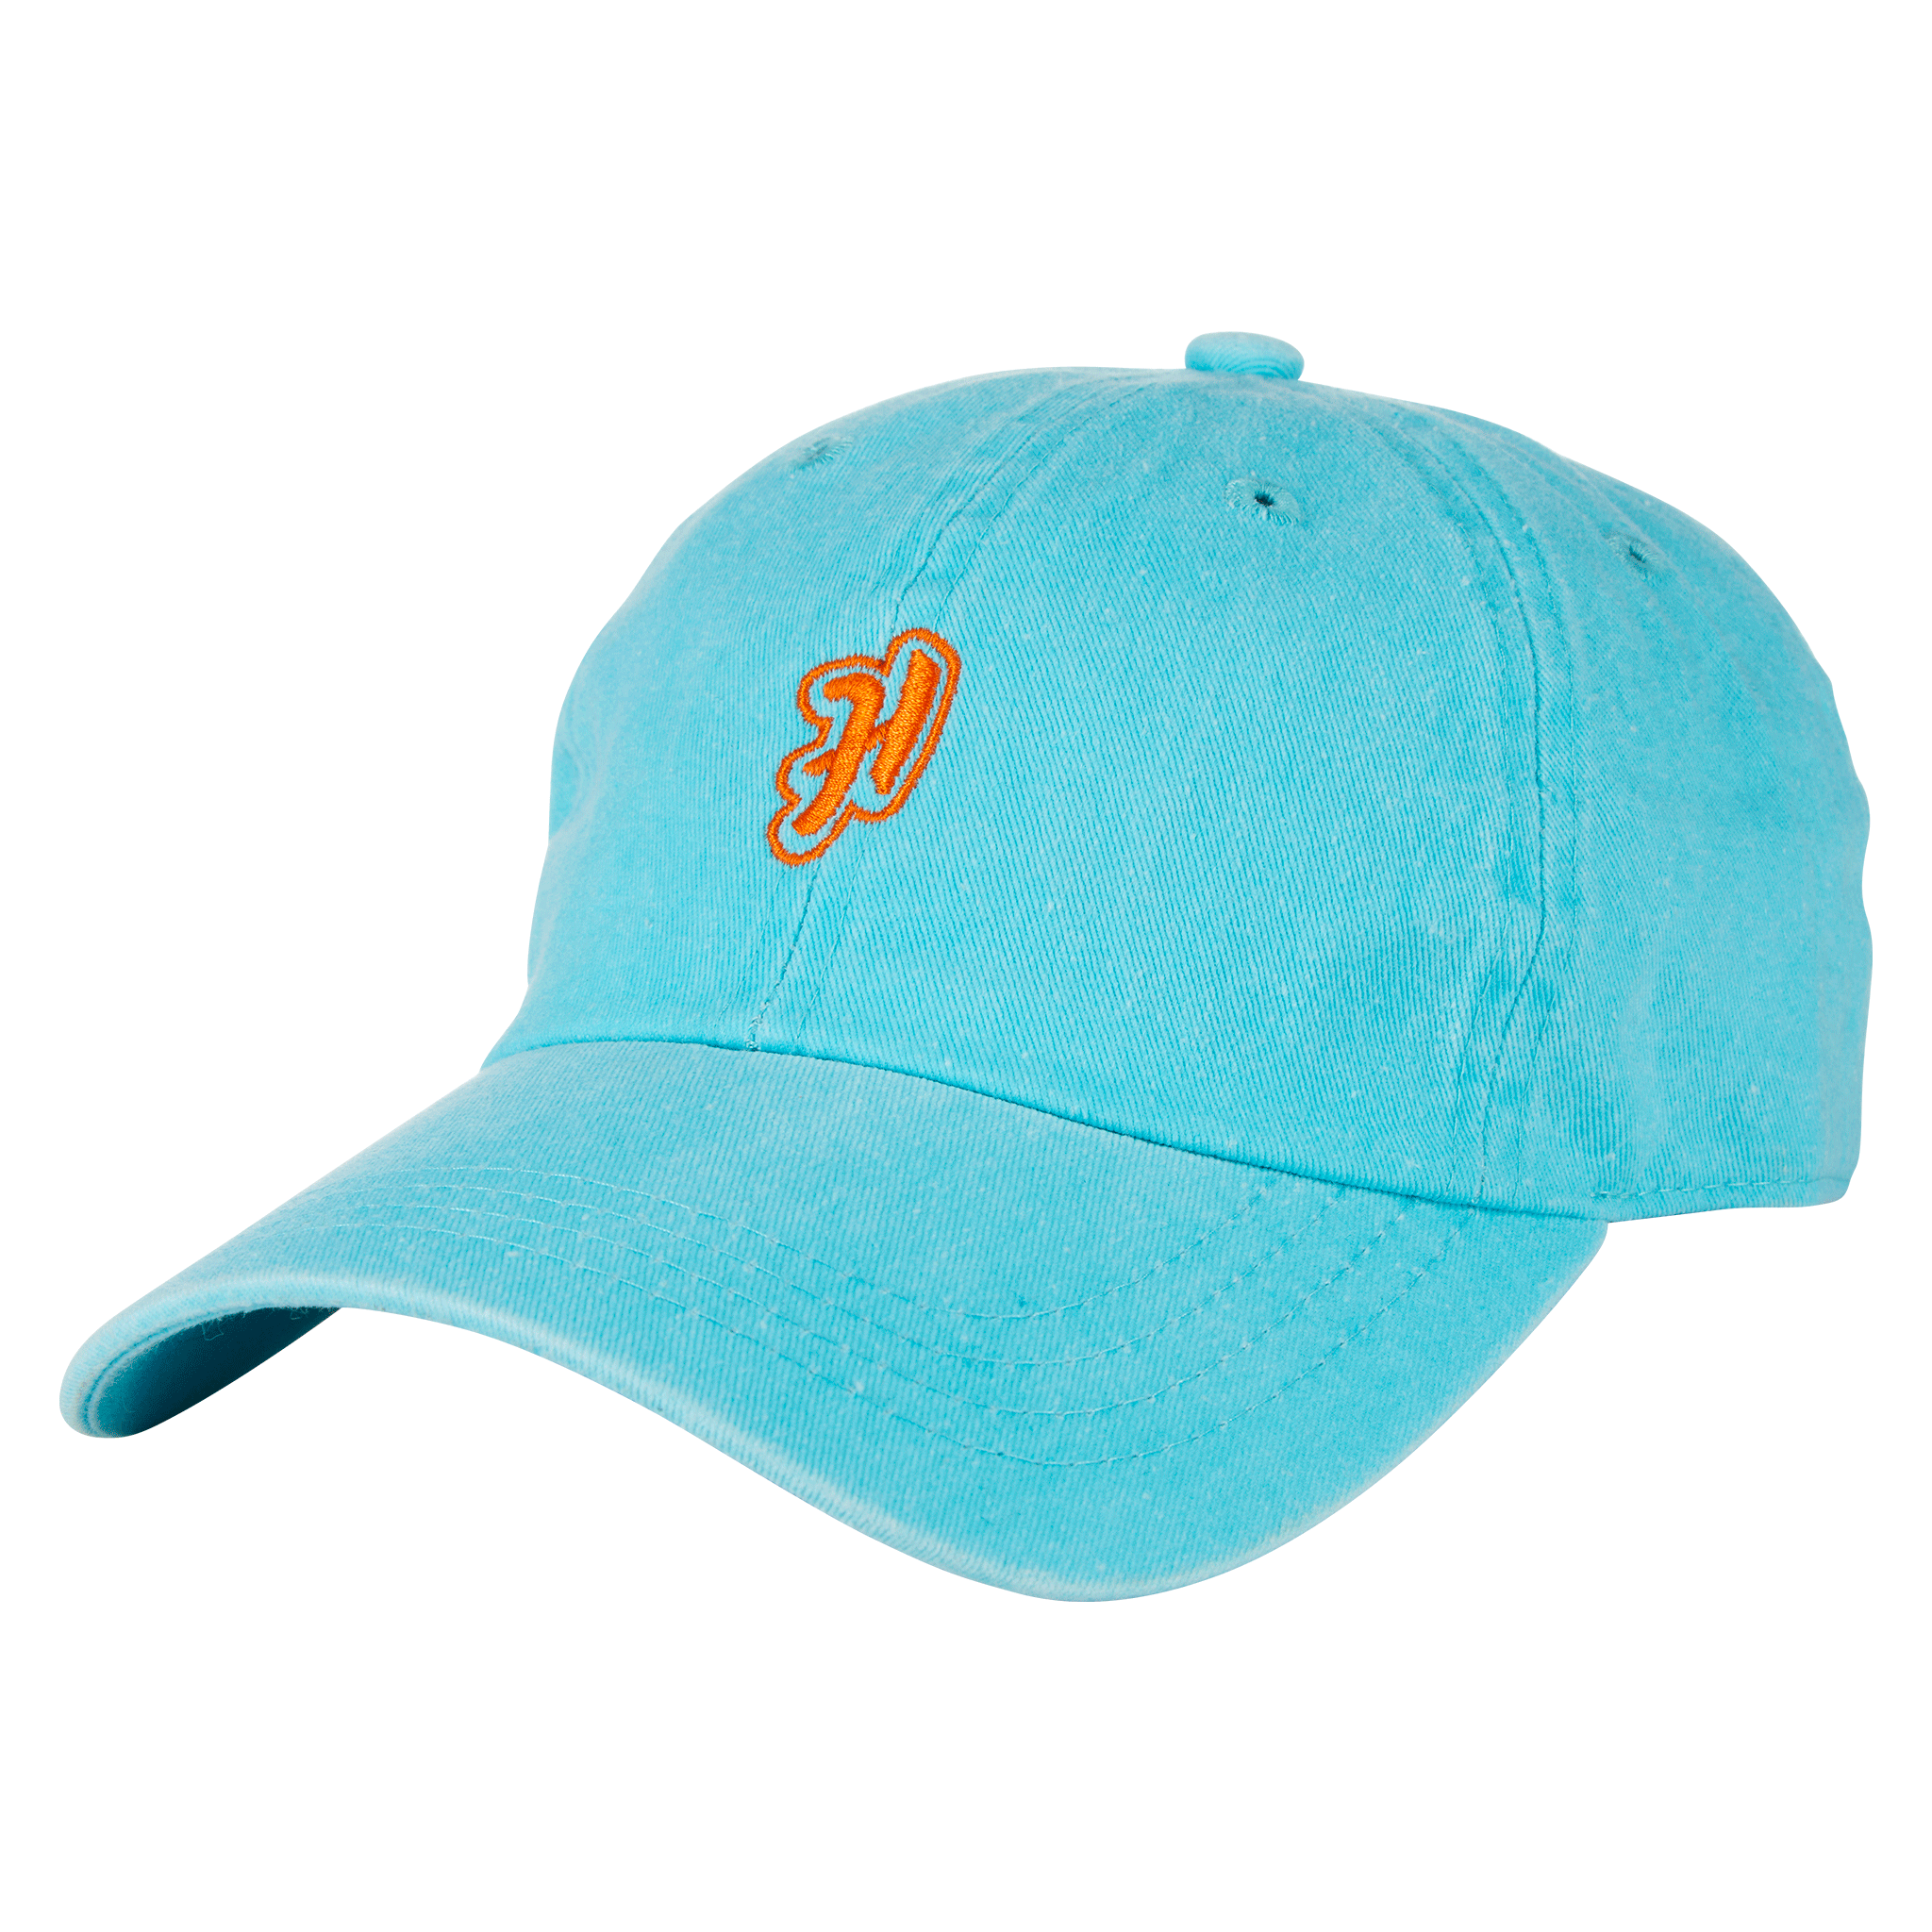 Limited Edition Highsman Dade County Strapback Hat